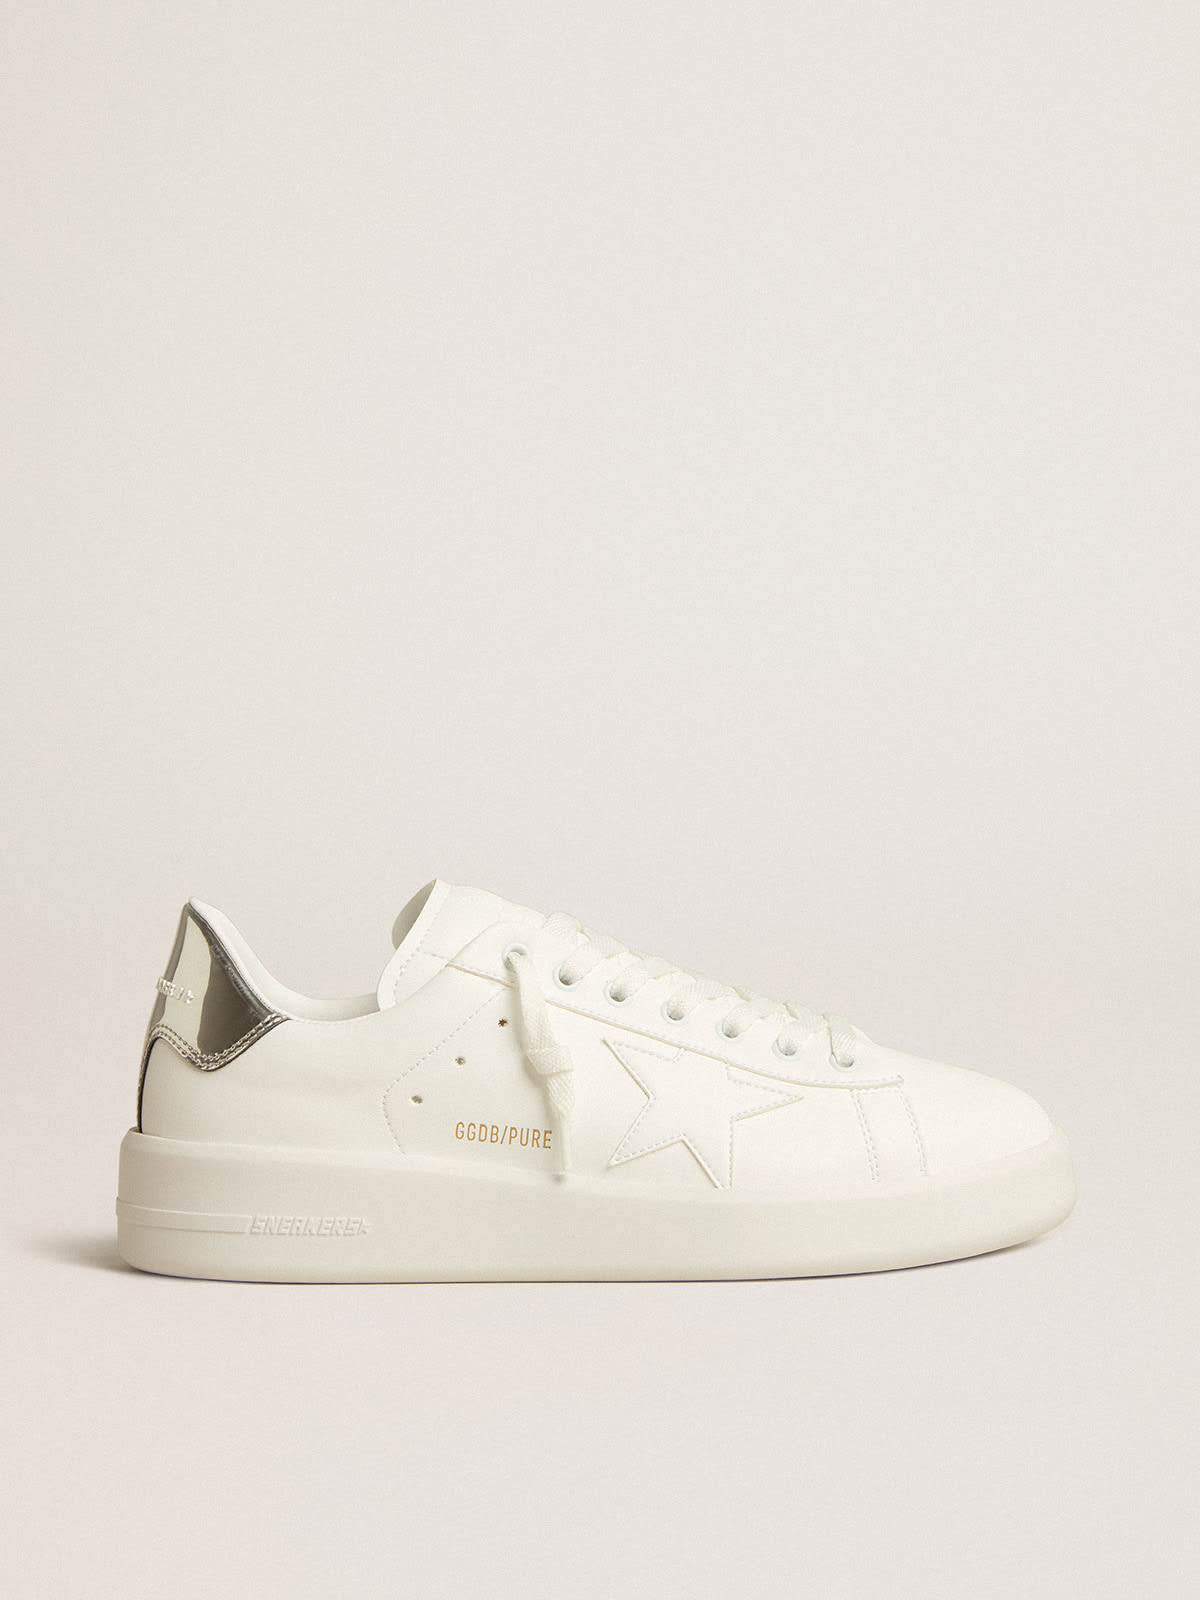 Golden Goose - Men’s bio-based Purestar with white star and mirror-effect heel tab in 